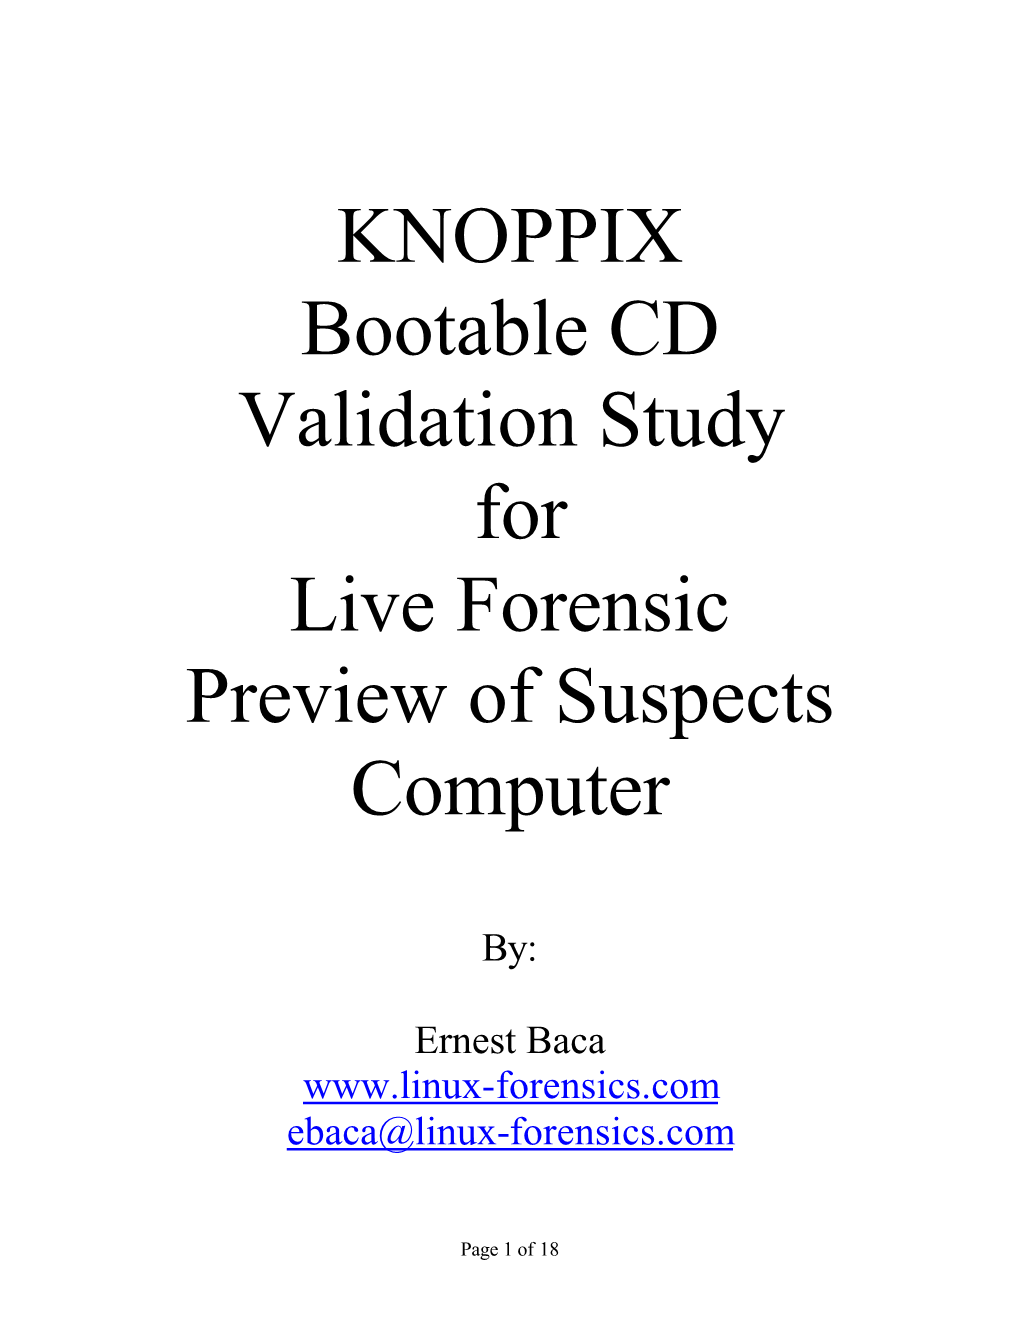 KNOPPIX Bootable CD Validation Study for Live Forensic Preview of Suspects Computer